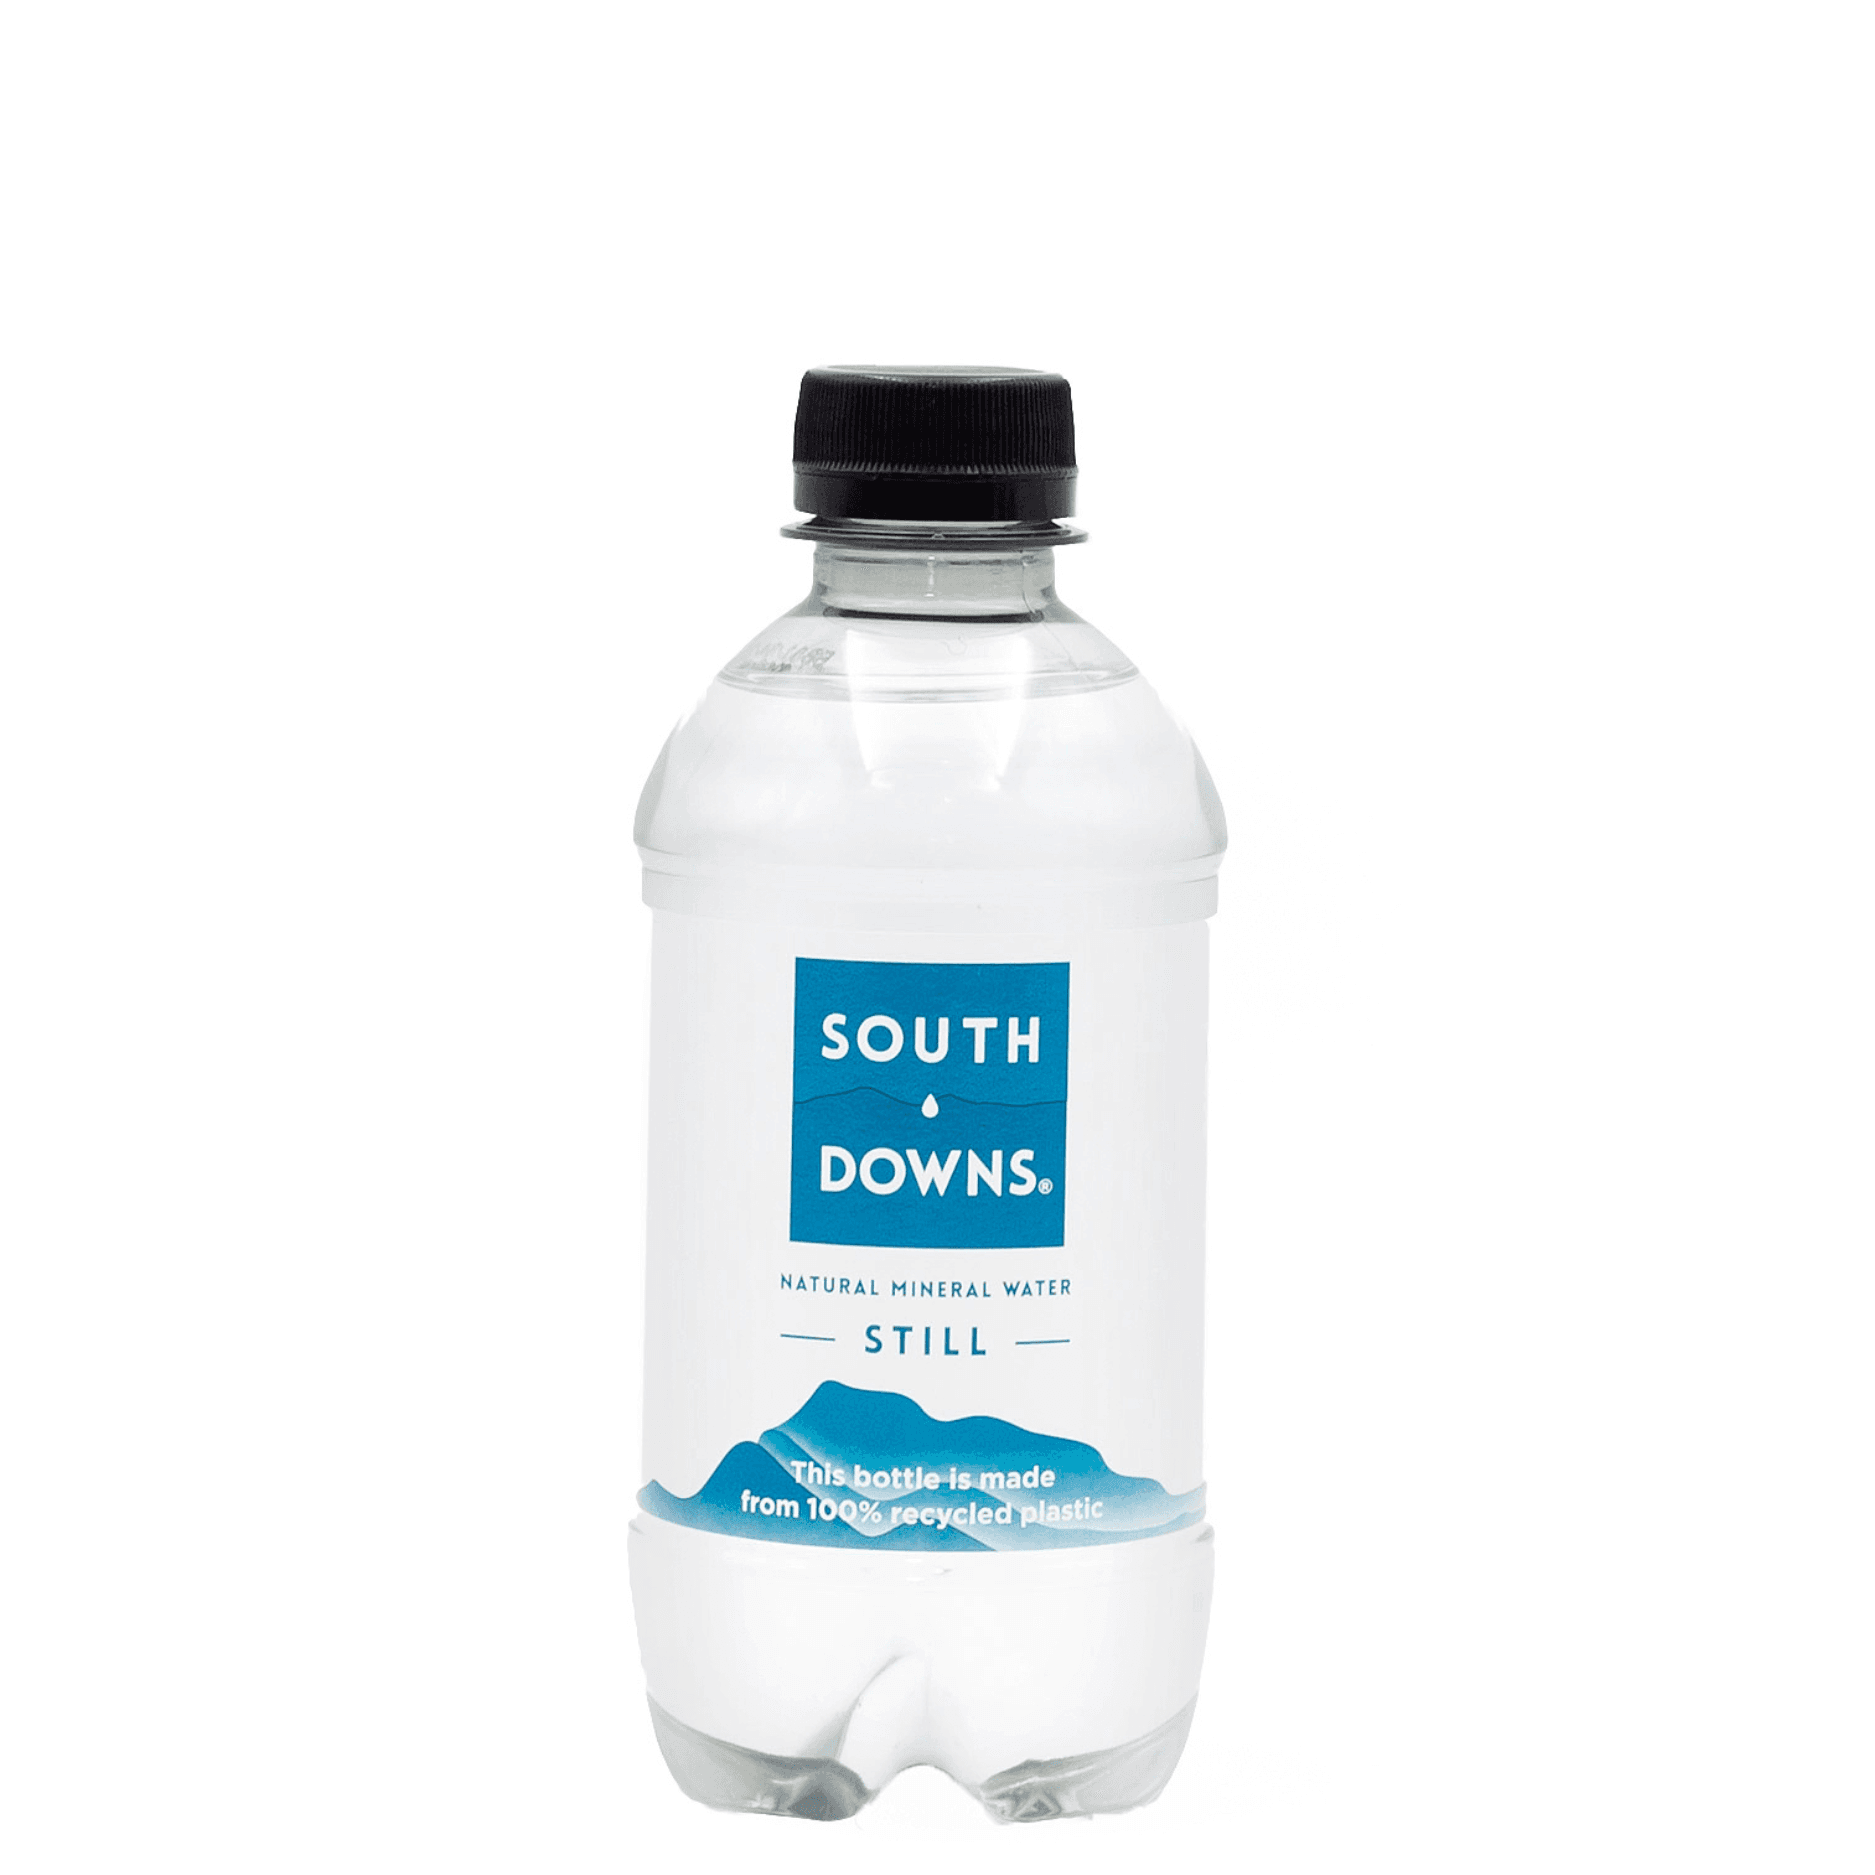 Product Still Bottled Natural Mineral Water 330ml (Case of 24) image